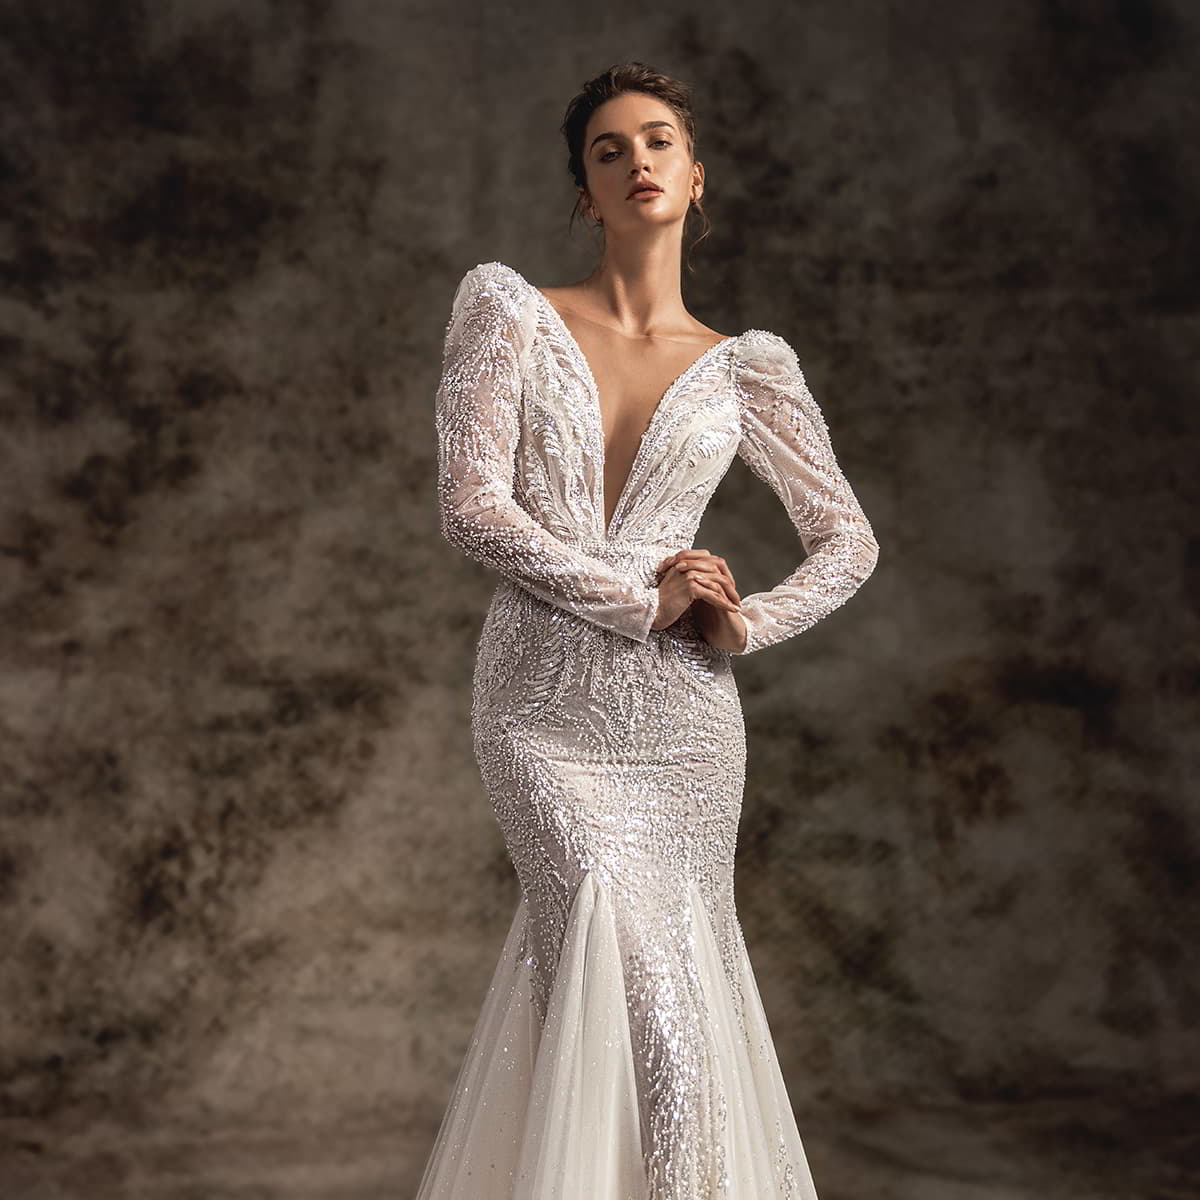 First Look: Wona Concept 2023 Wedding Dresses — “Notte d'Opera” Couture  Bridal Collection